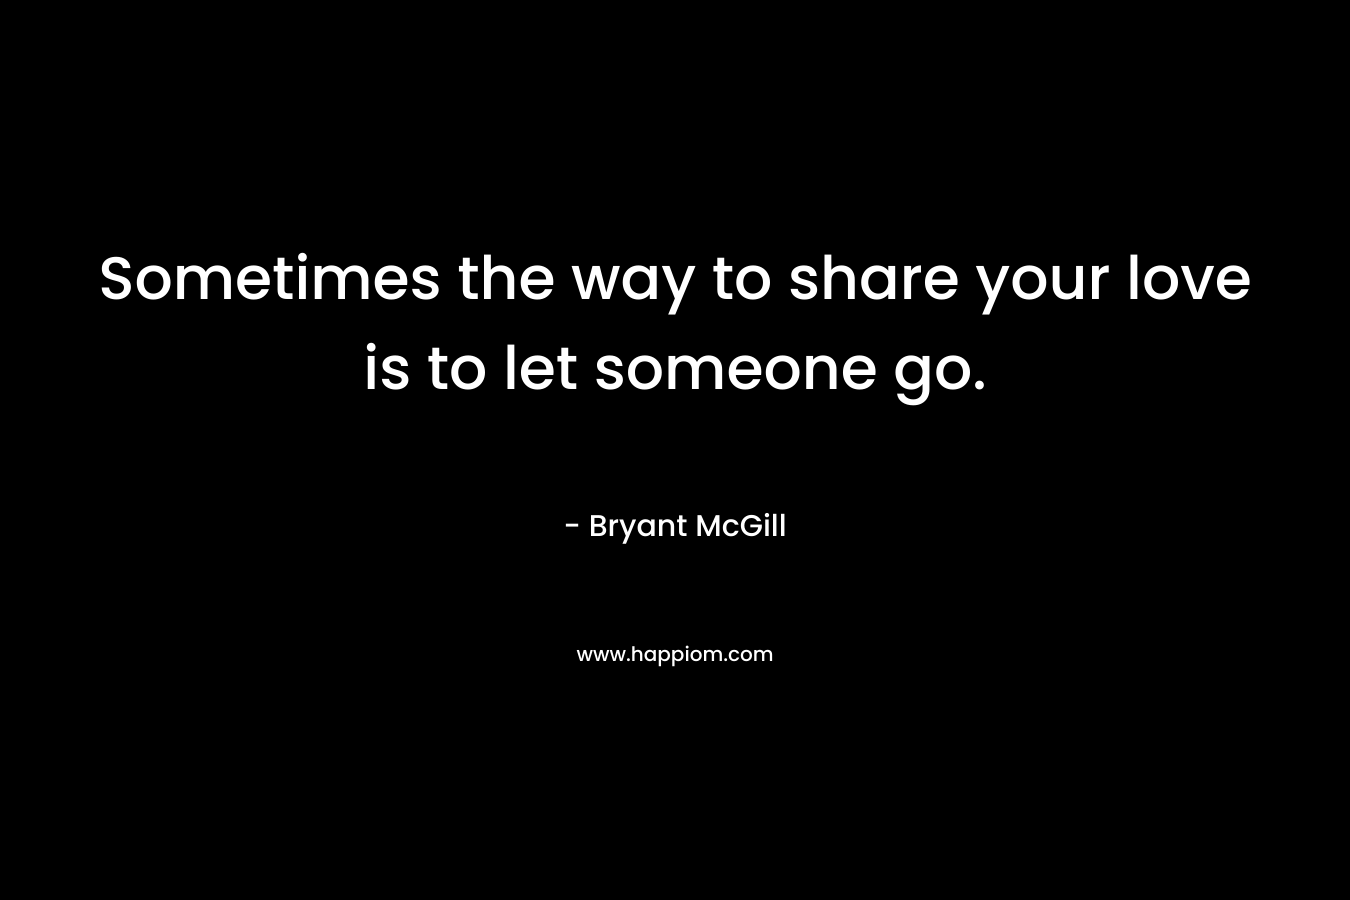 Sometimes the way to share your love is to let someone go. – Bryant McGill